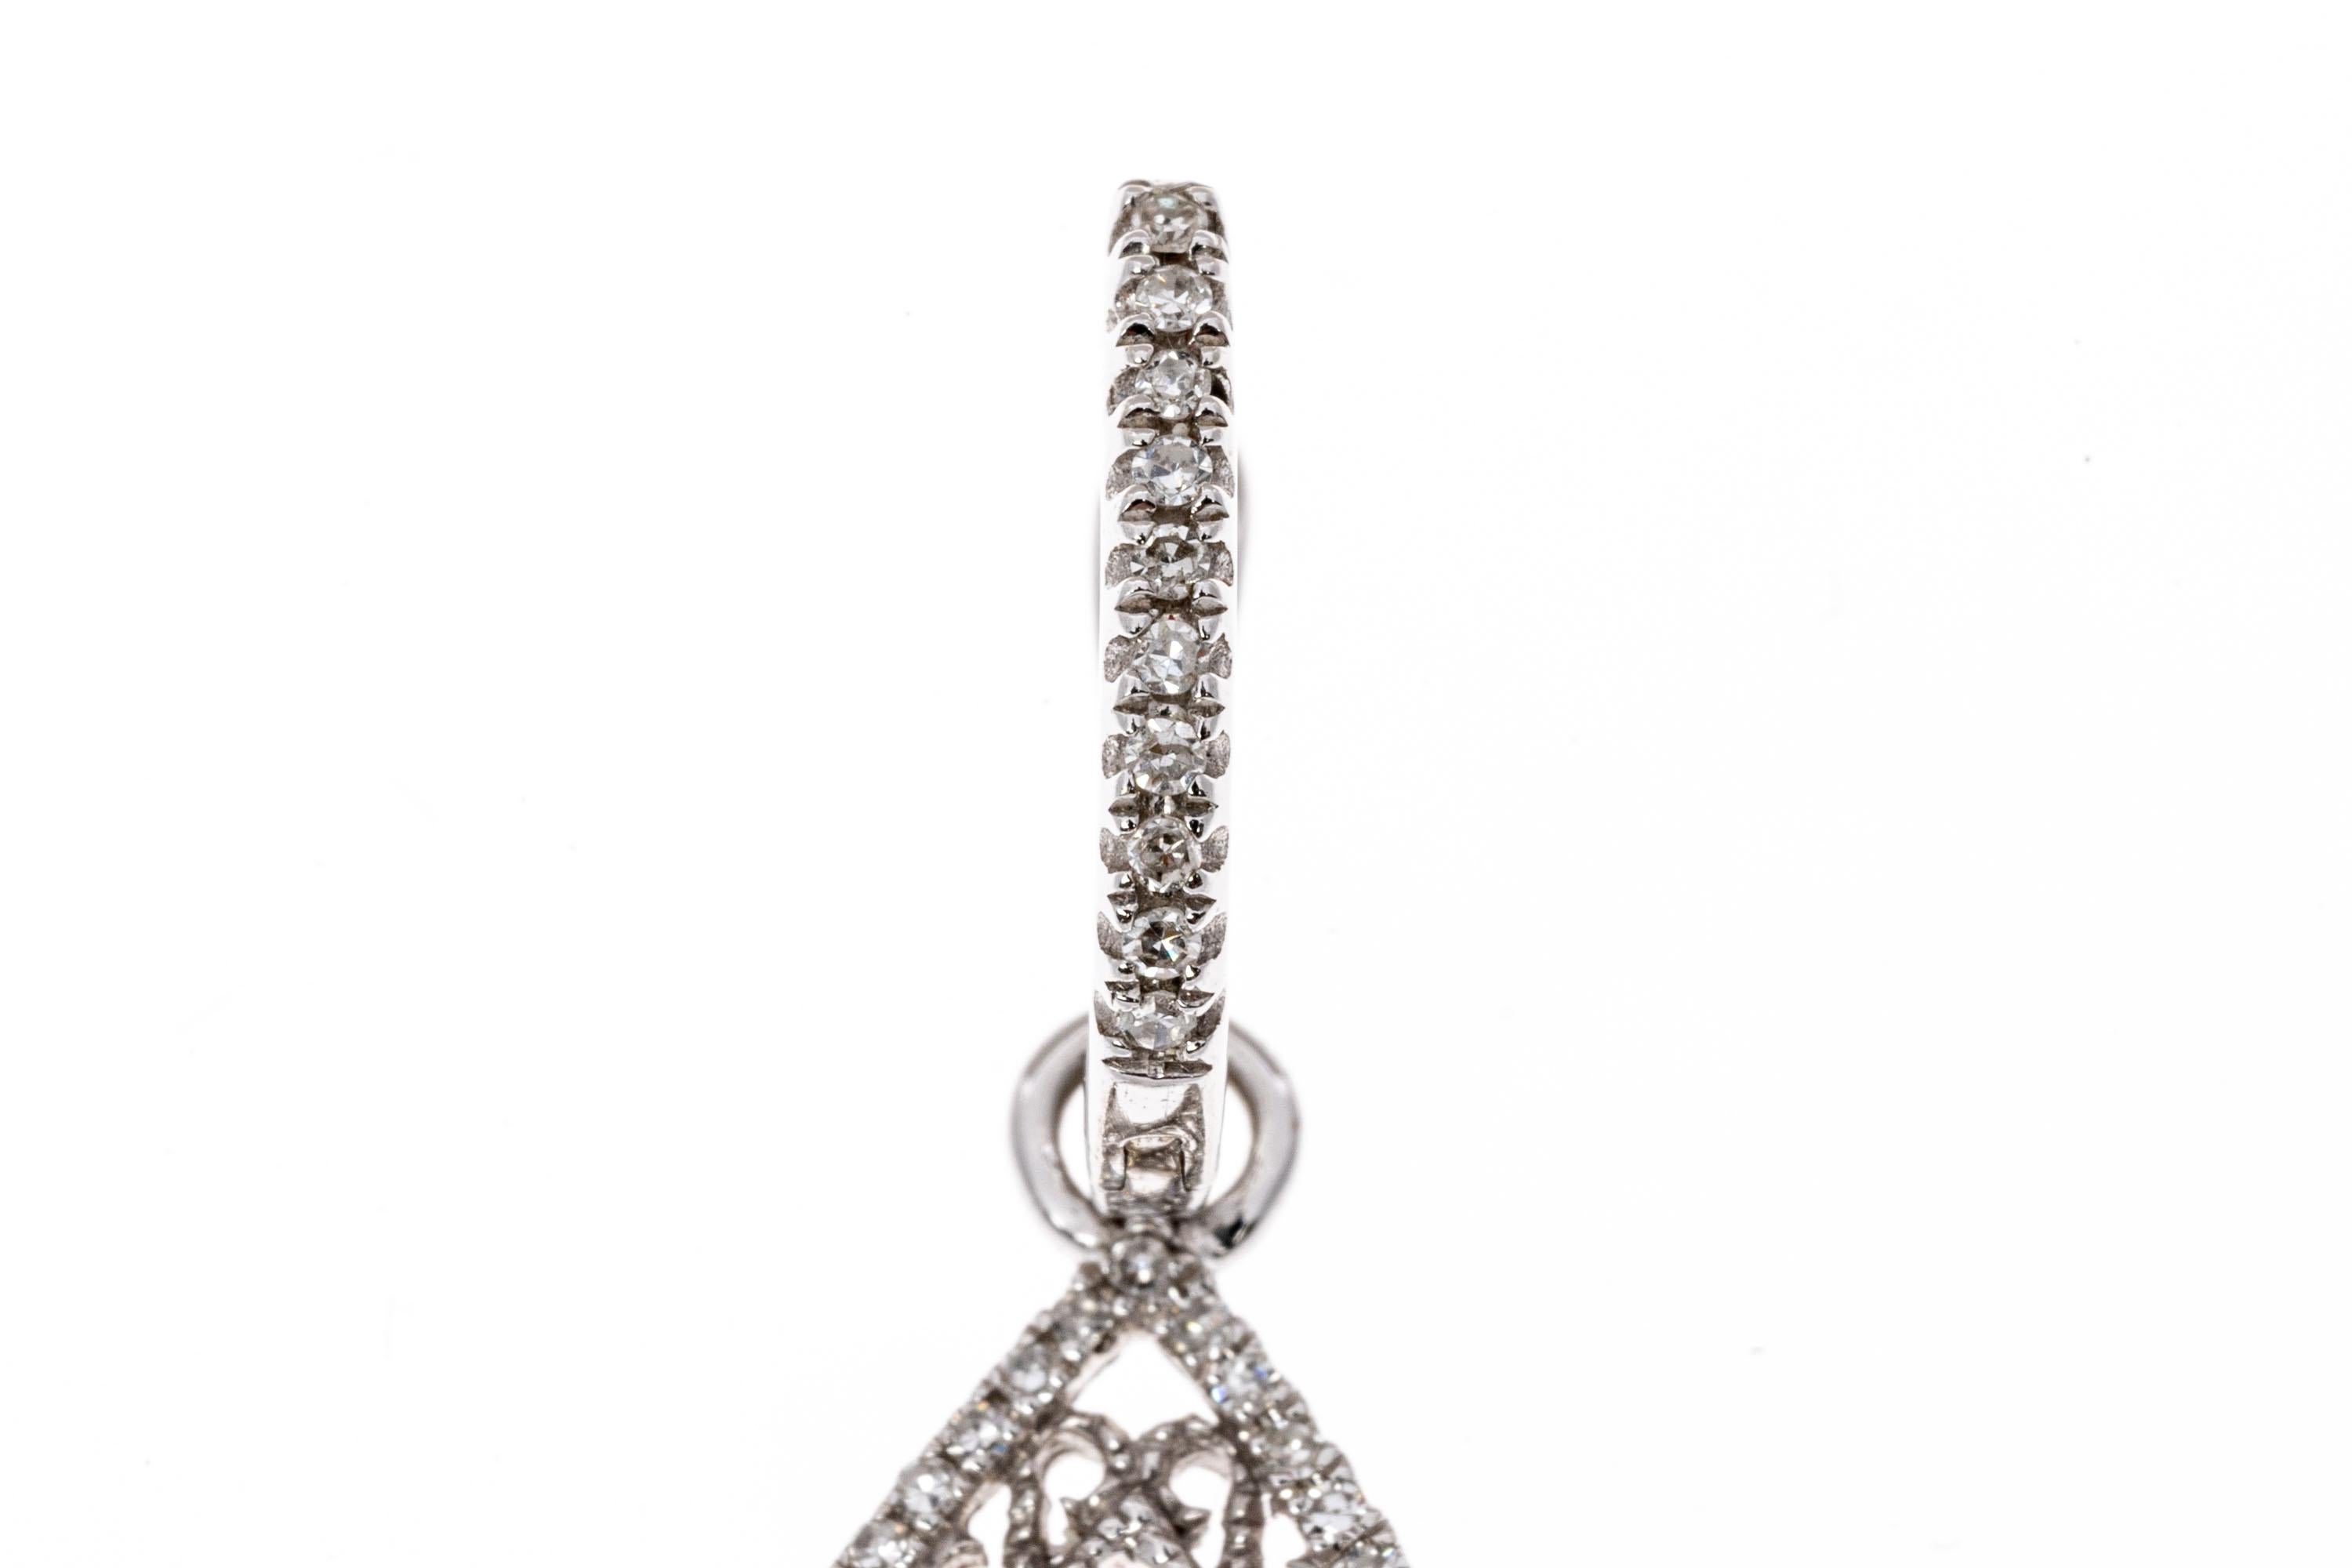 14k white gold earrings. These beautiful, versatile earrings contain a small hoop top, set with a row of round faceted, white diamonds. Suspended from the hoop is a pear shaped open drop style pendant, bordered with a fine filigree edge and trimmed